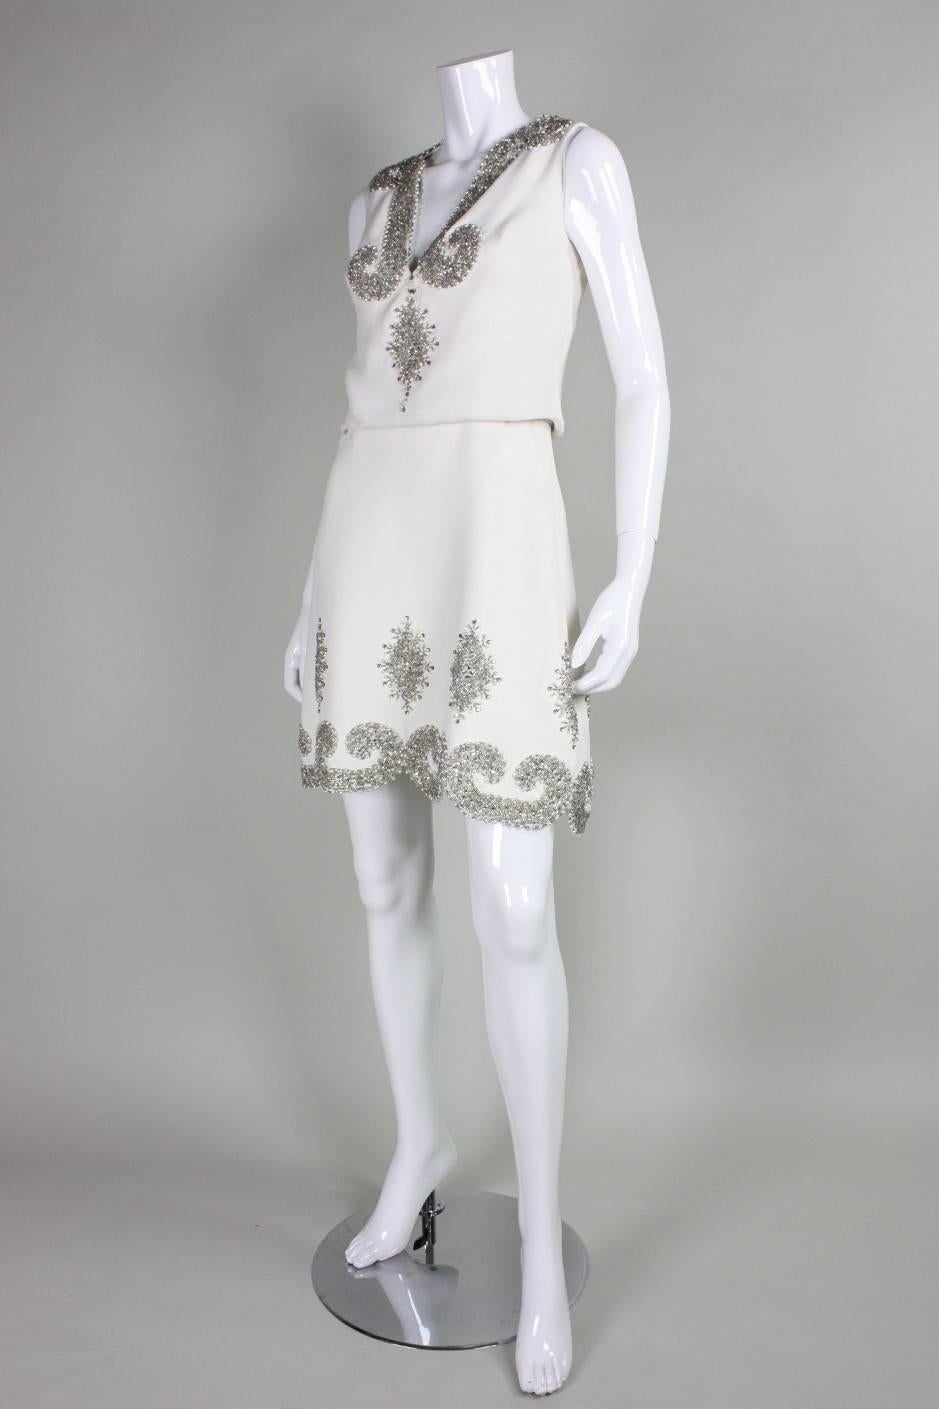 Vintage party dress from Italian boutique Renata dates to the 1960's.  It is made of white crepe with beautiful silver-toned rhinestone and beaded trim and detailing.  Scalloped hem.  Fully lined. Center back zipper.

No size label, but it would